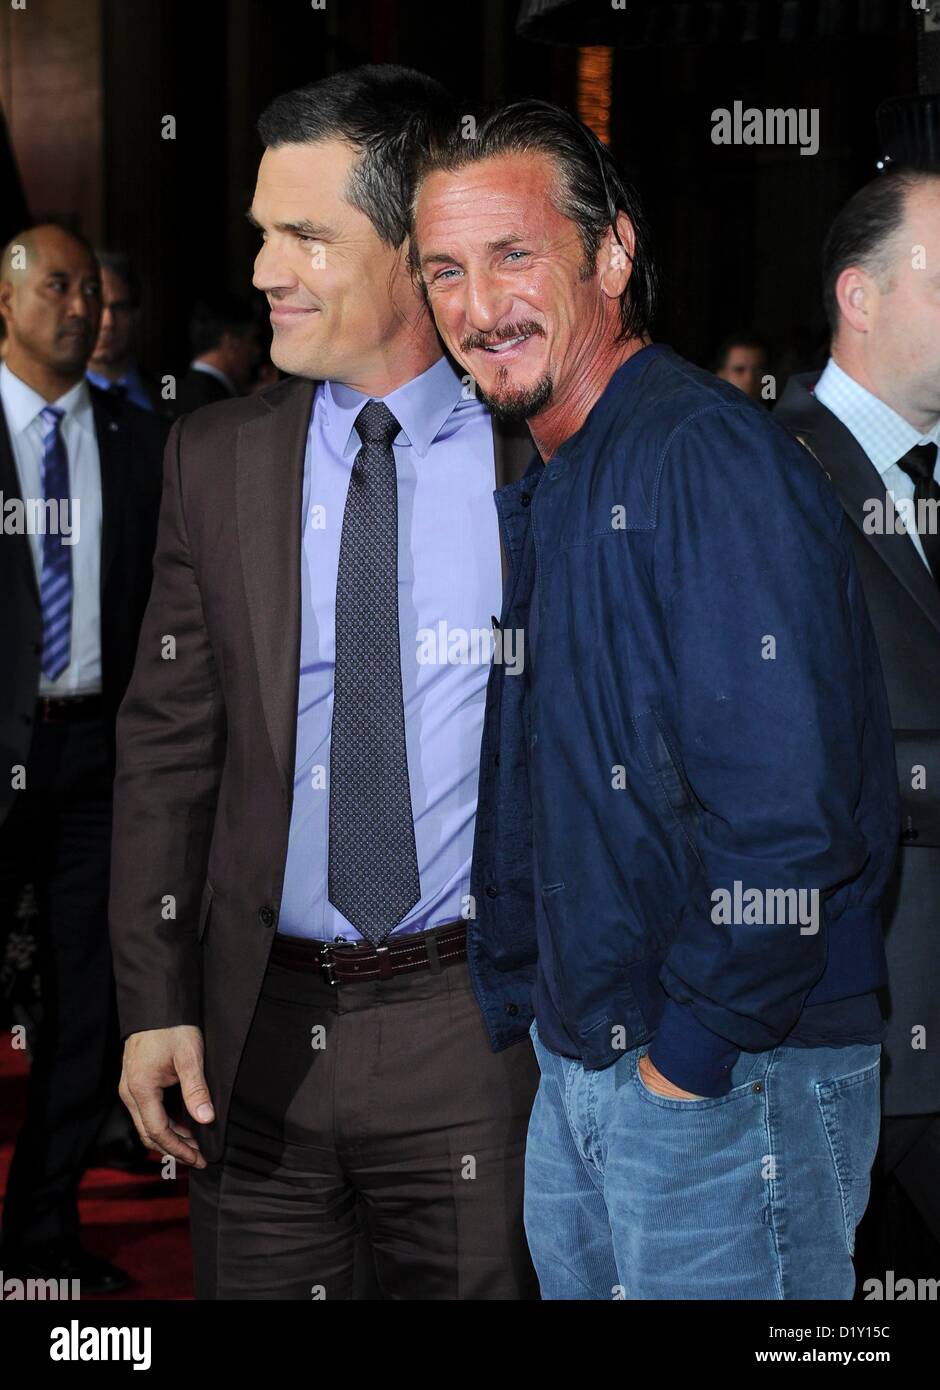 Actors Sean Penn and Josh Brolin arrive at the film premiere for 'Gangster Squad' at the Chinese Theatre in Hollywood, USA January 7th 2013 Stock Photo